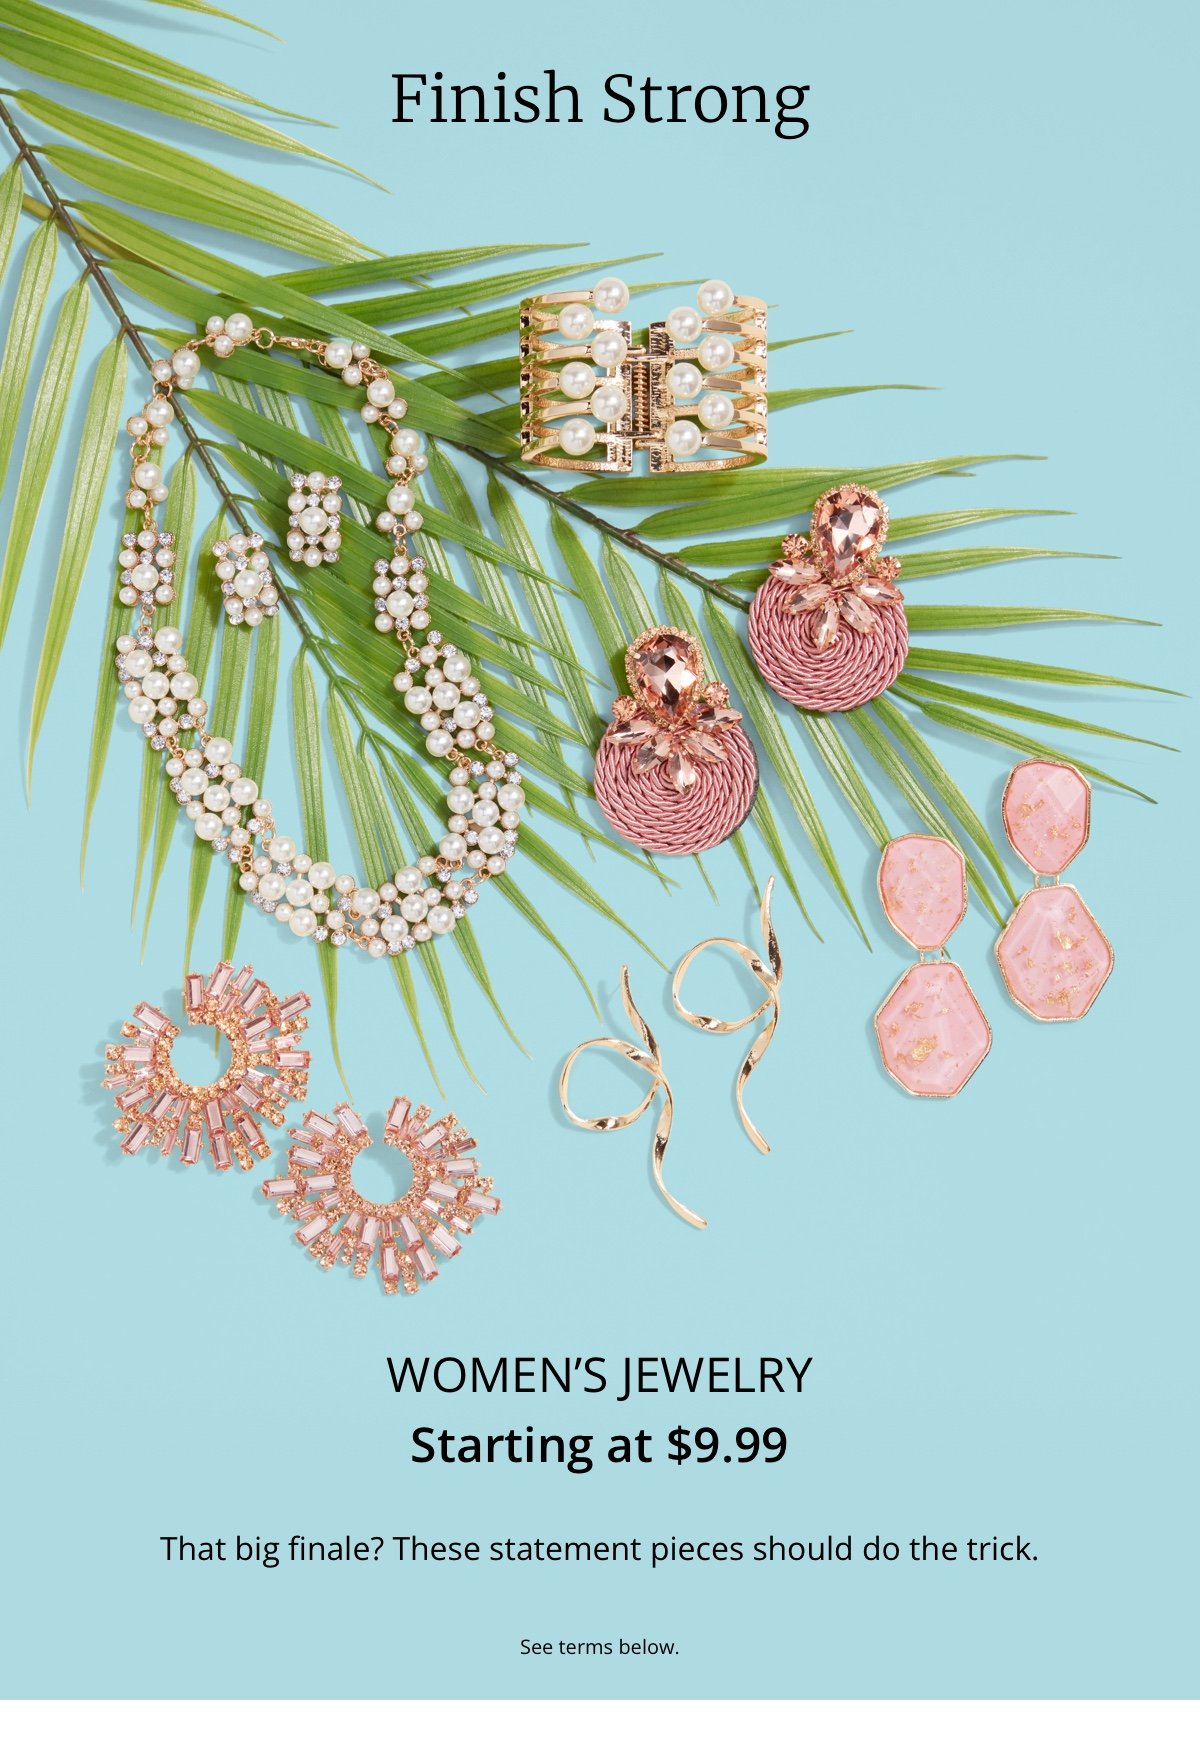 Finish Strong|Women's Jewelry|Starting at \\$9.99|That big finale? These statement pieces should do the trick.|See terms below.